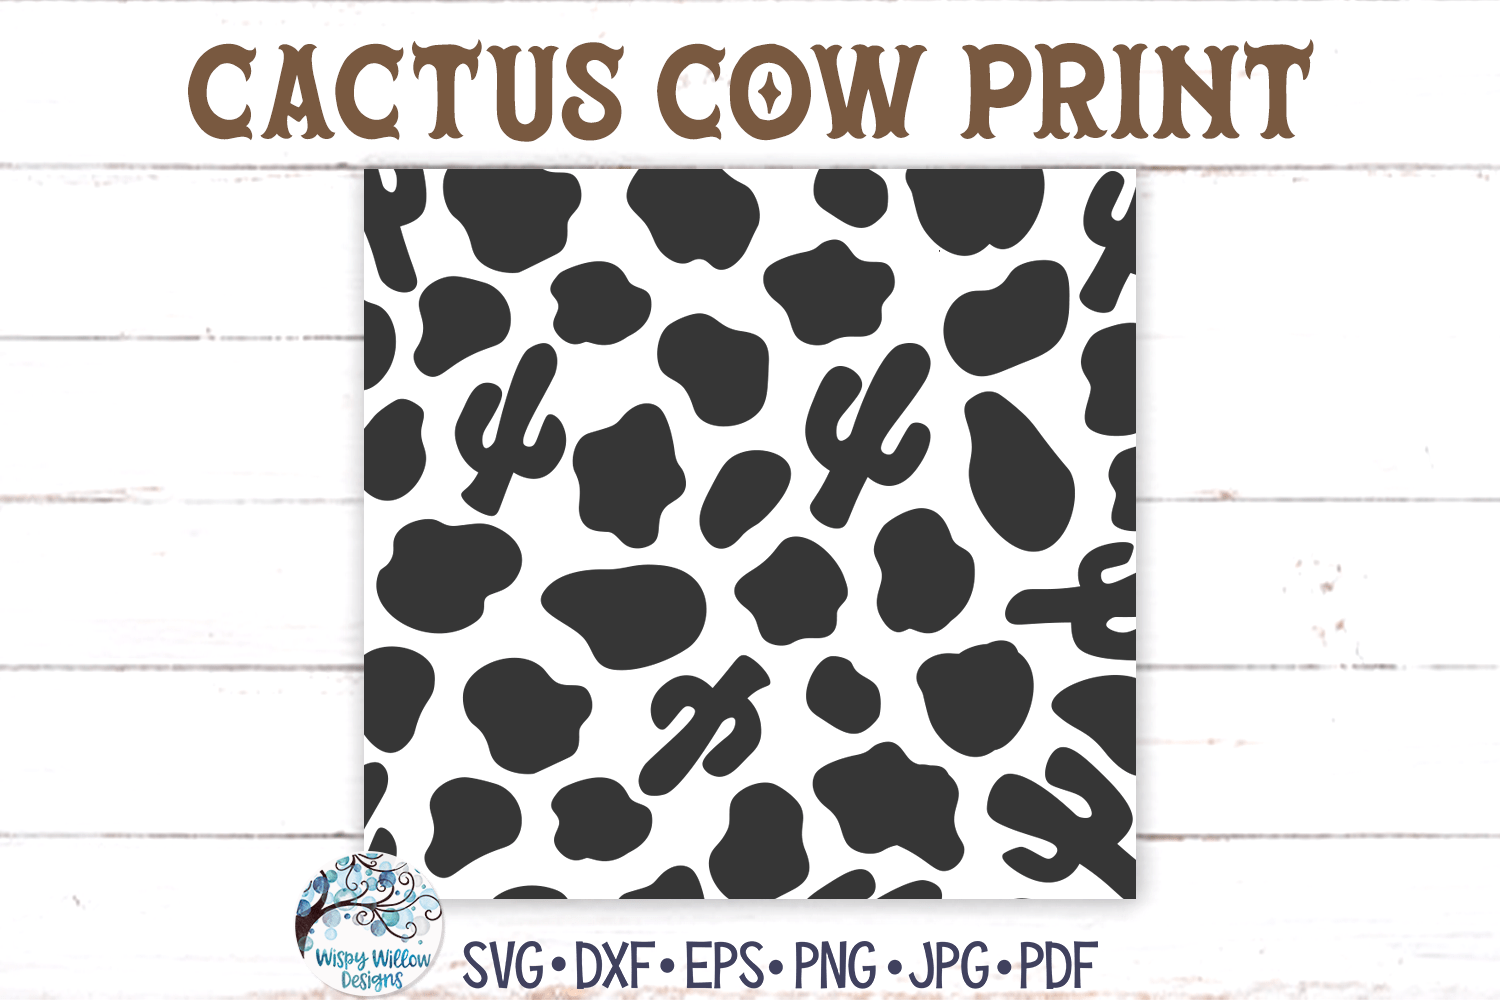 Cactus Cow Print SVG | Western Animal Pattern Wispy Willow Designs Company